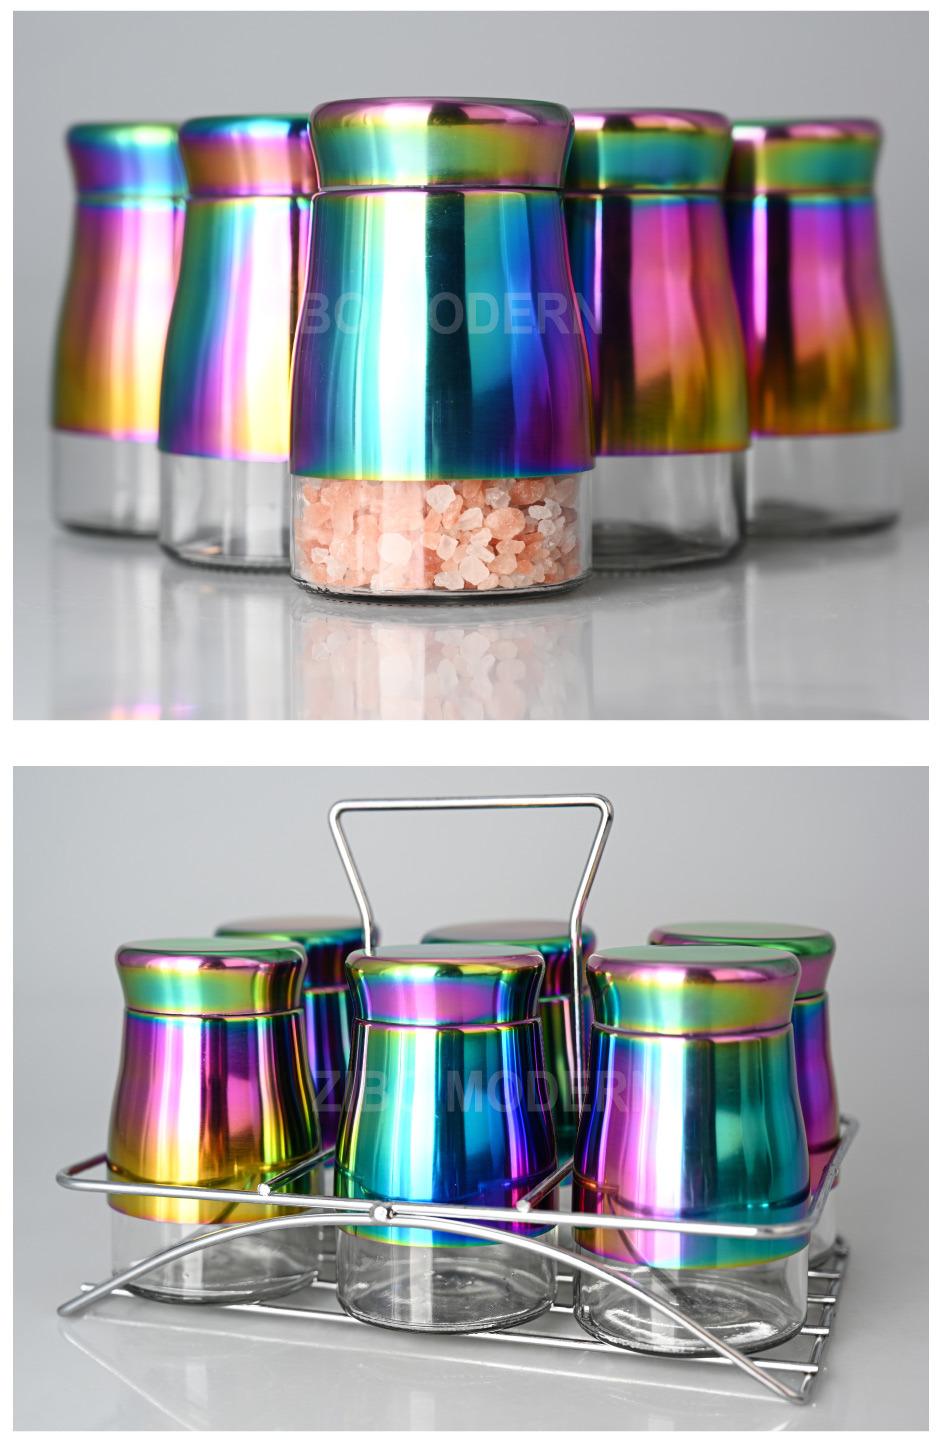 Rainbow Color Glass and Stainless-Steel Spice Storage / Jar Rack Countertop Herb Organization for Home & Kitchen Set of 6